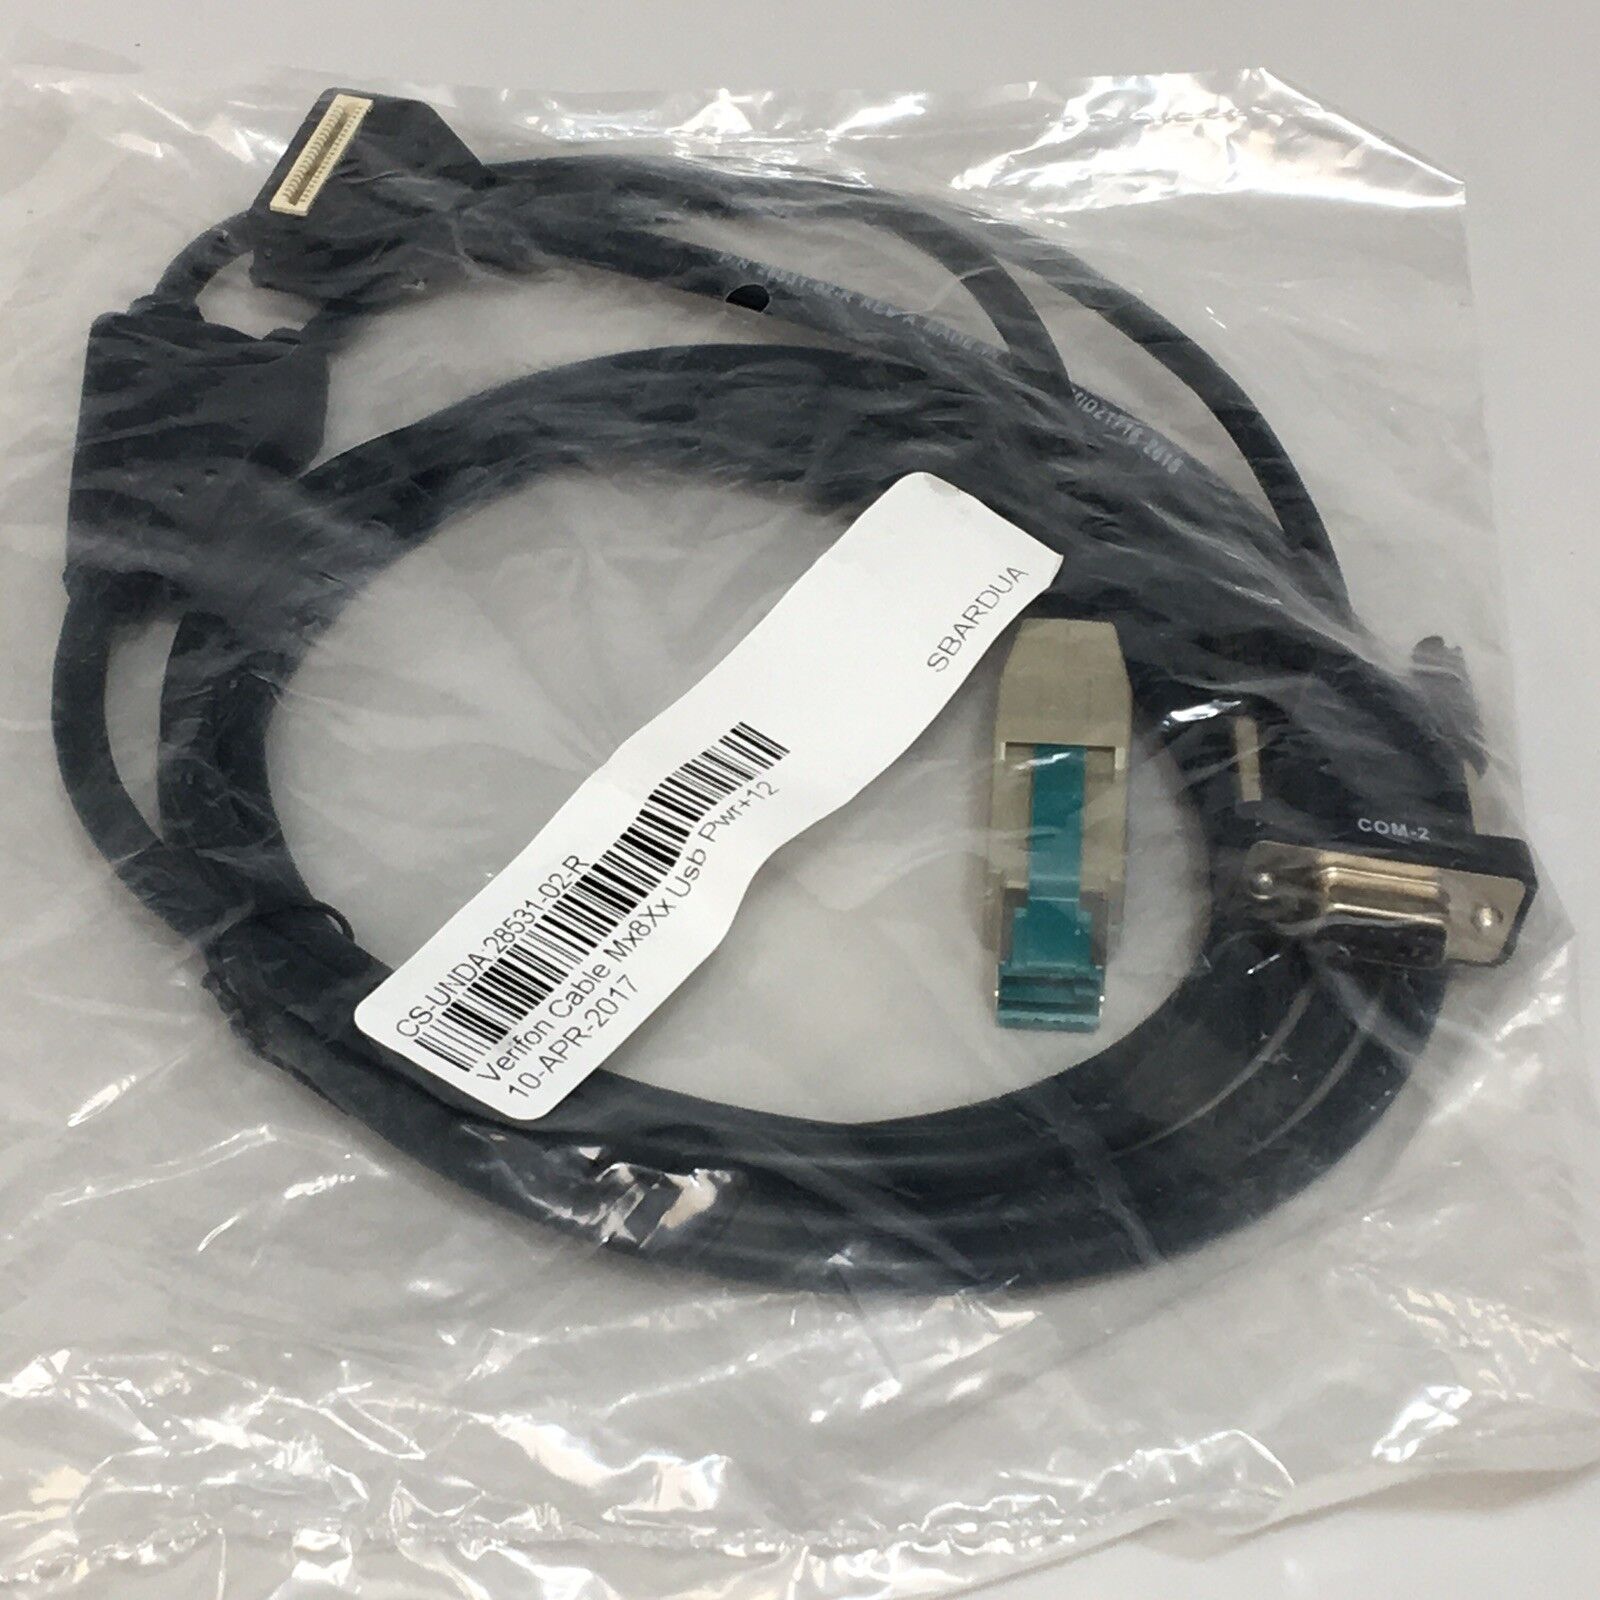 Verifone 28531-02-R Cable MX8XX USB PWR+12V DB9F COM2 2M Rohs - (Lots Available)